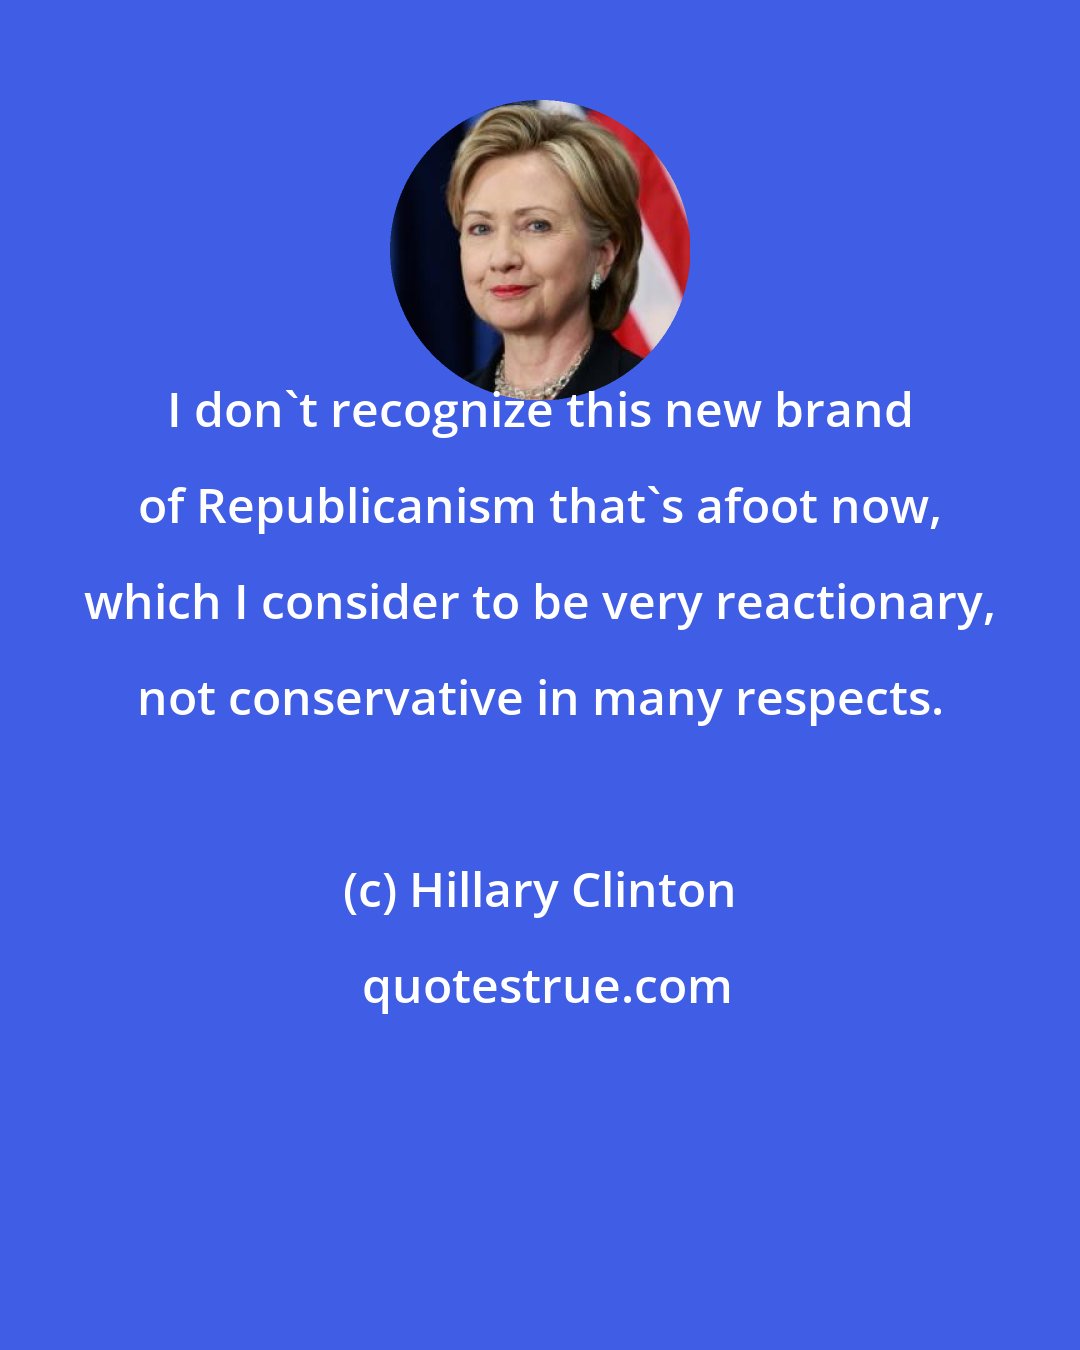 Hillary Clinton: I don't recognize this new brand of Republicanism that's afoot now, which I consider to be very reactionary, not conservative in many respects.